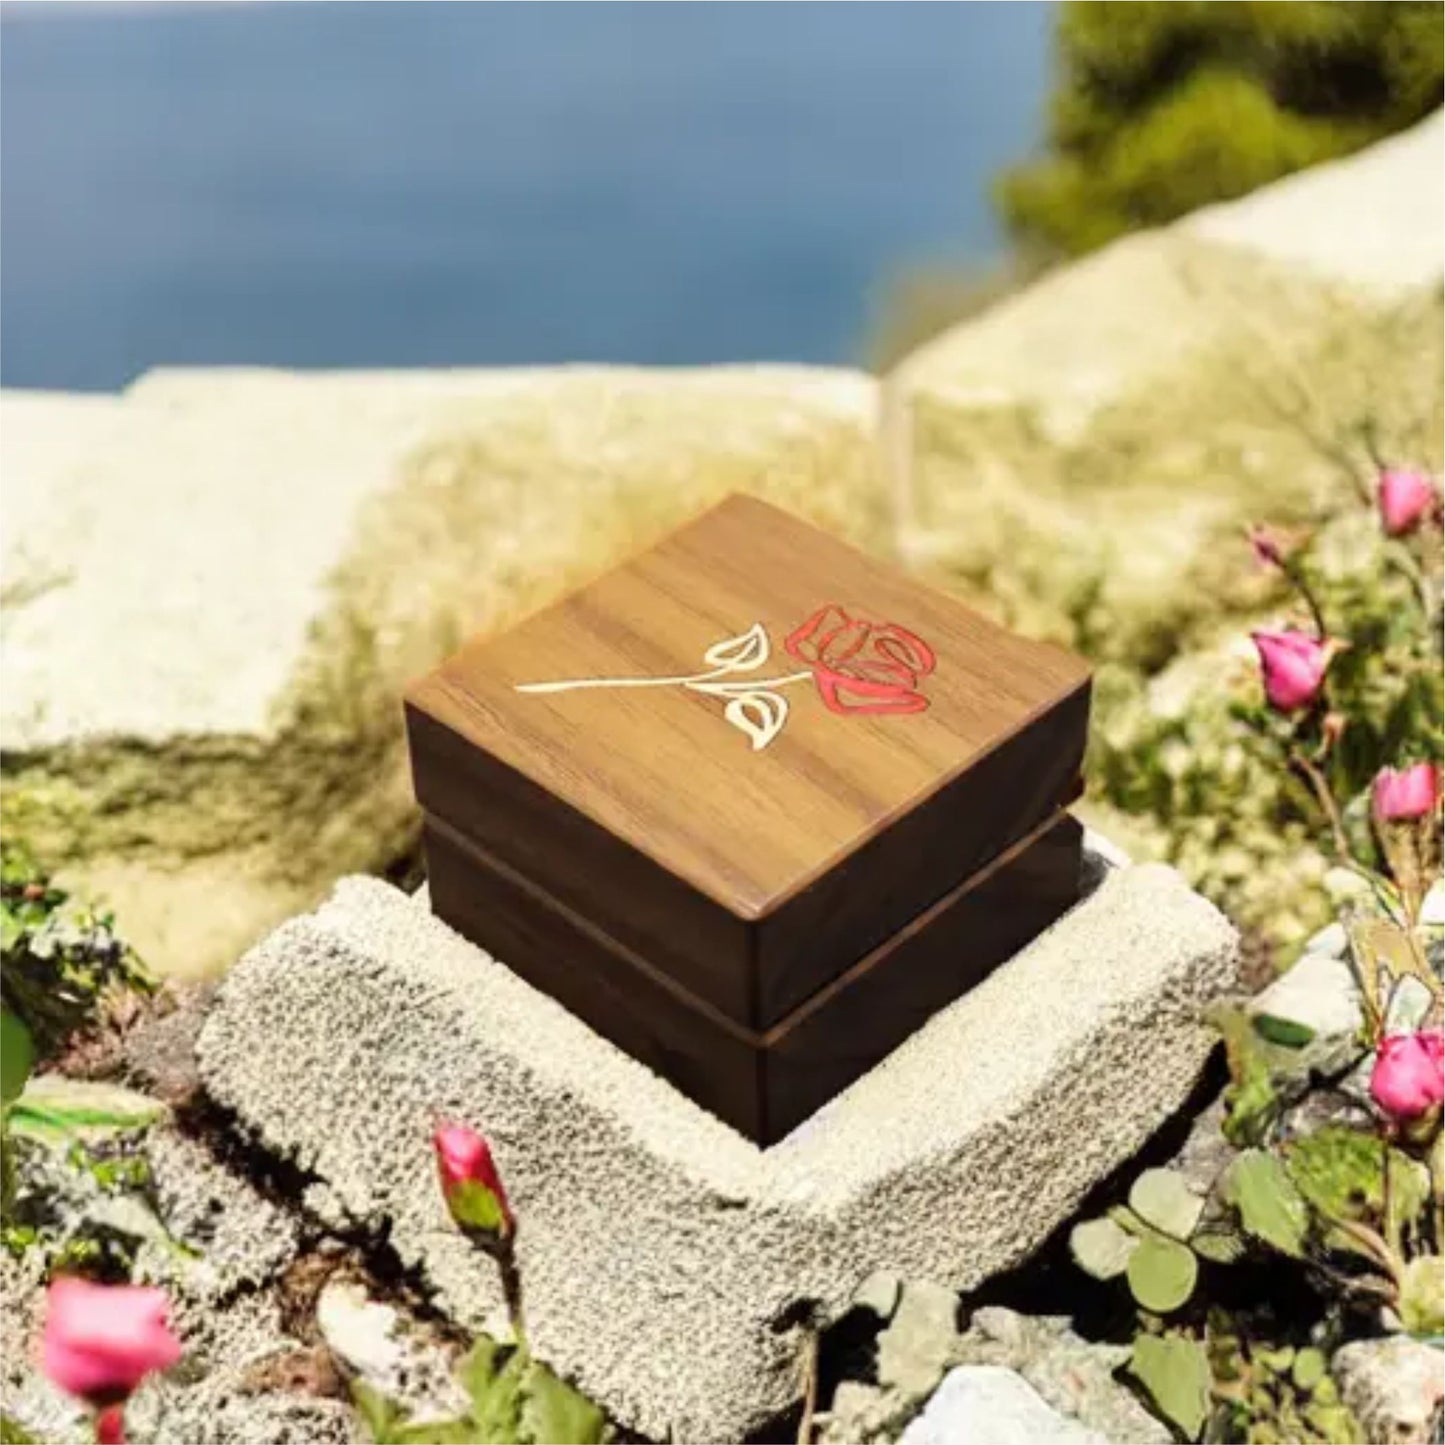 Handcrafted Inlaid Walnut Ring Box - "Rose" RB-32   Made in the U.S.